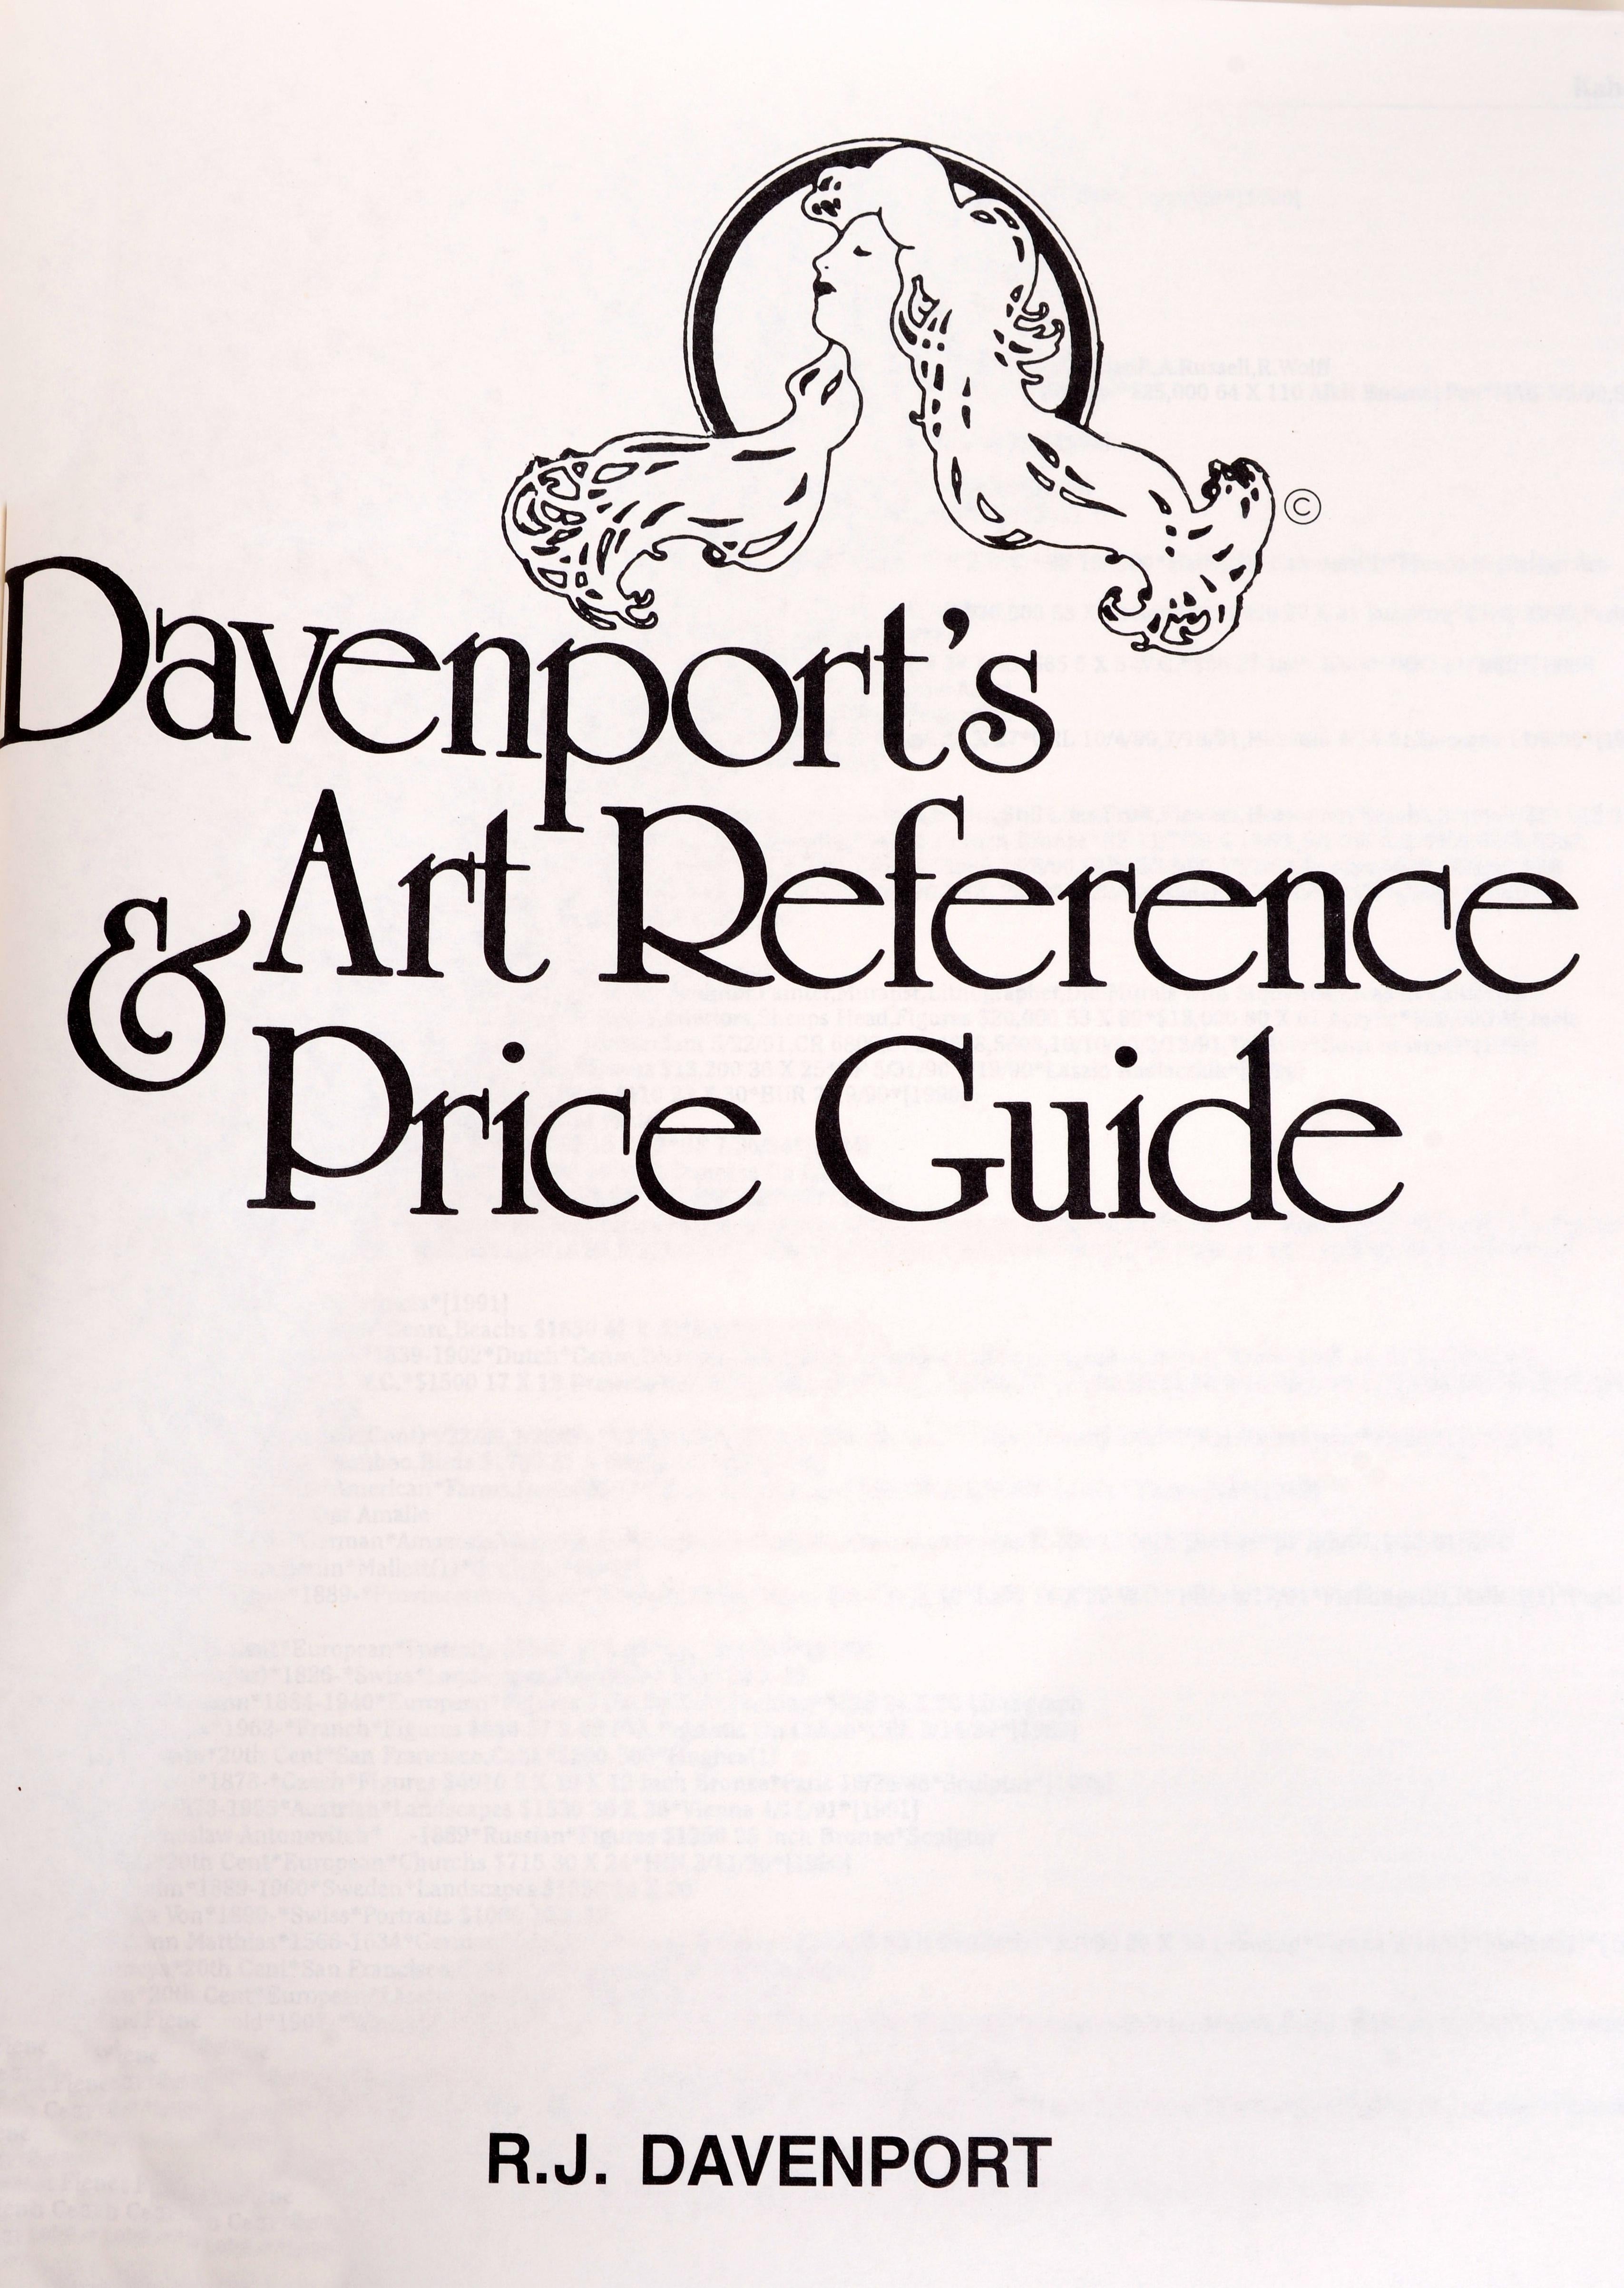 Davenport's Art Reference and Price Guide 2 Volumes by R. J. Davenport In Good Condition For Sale In valatie, NY